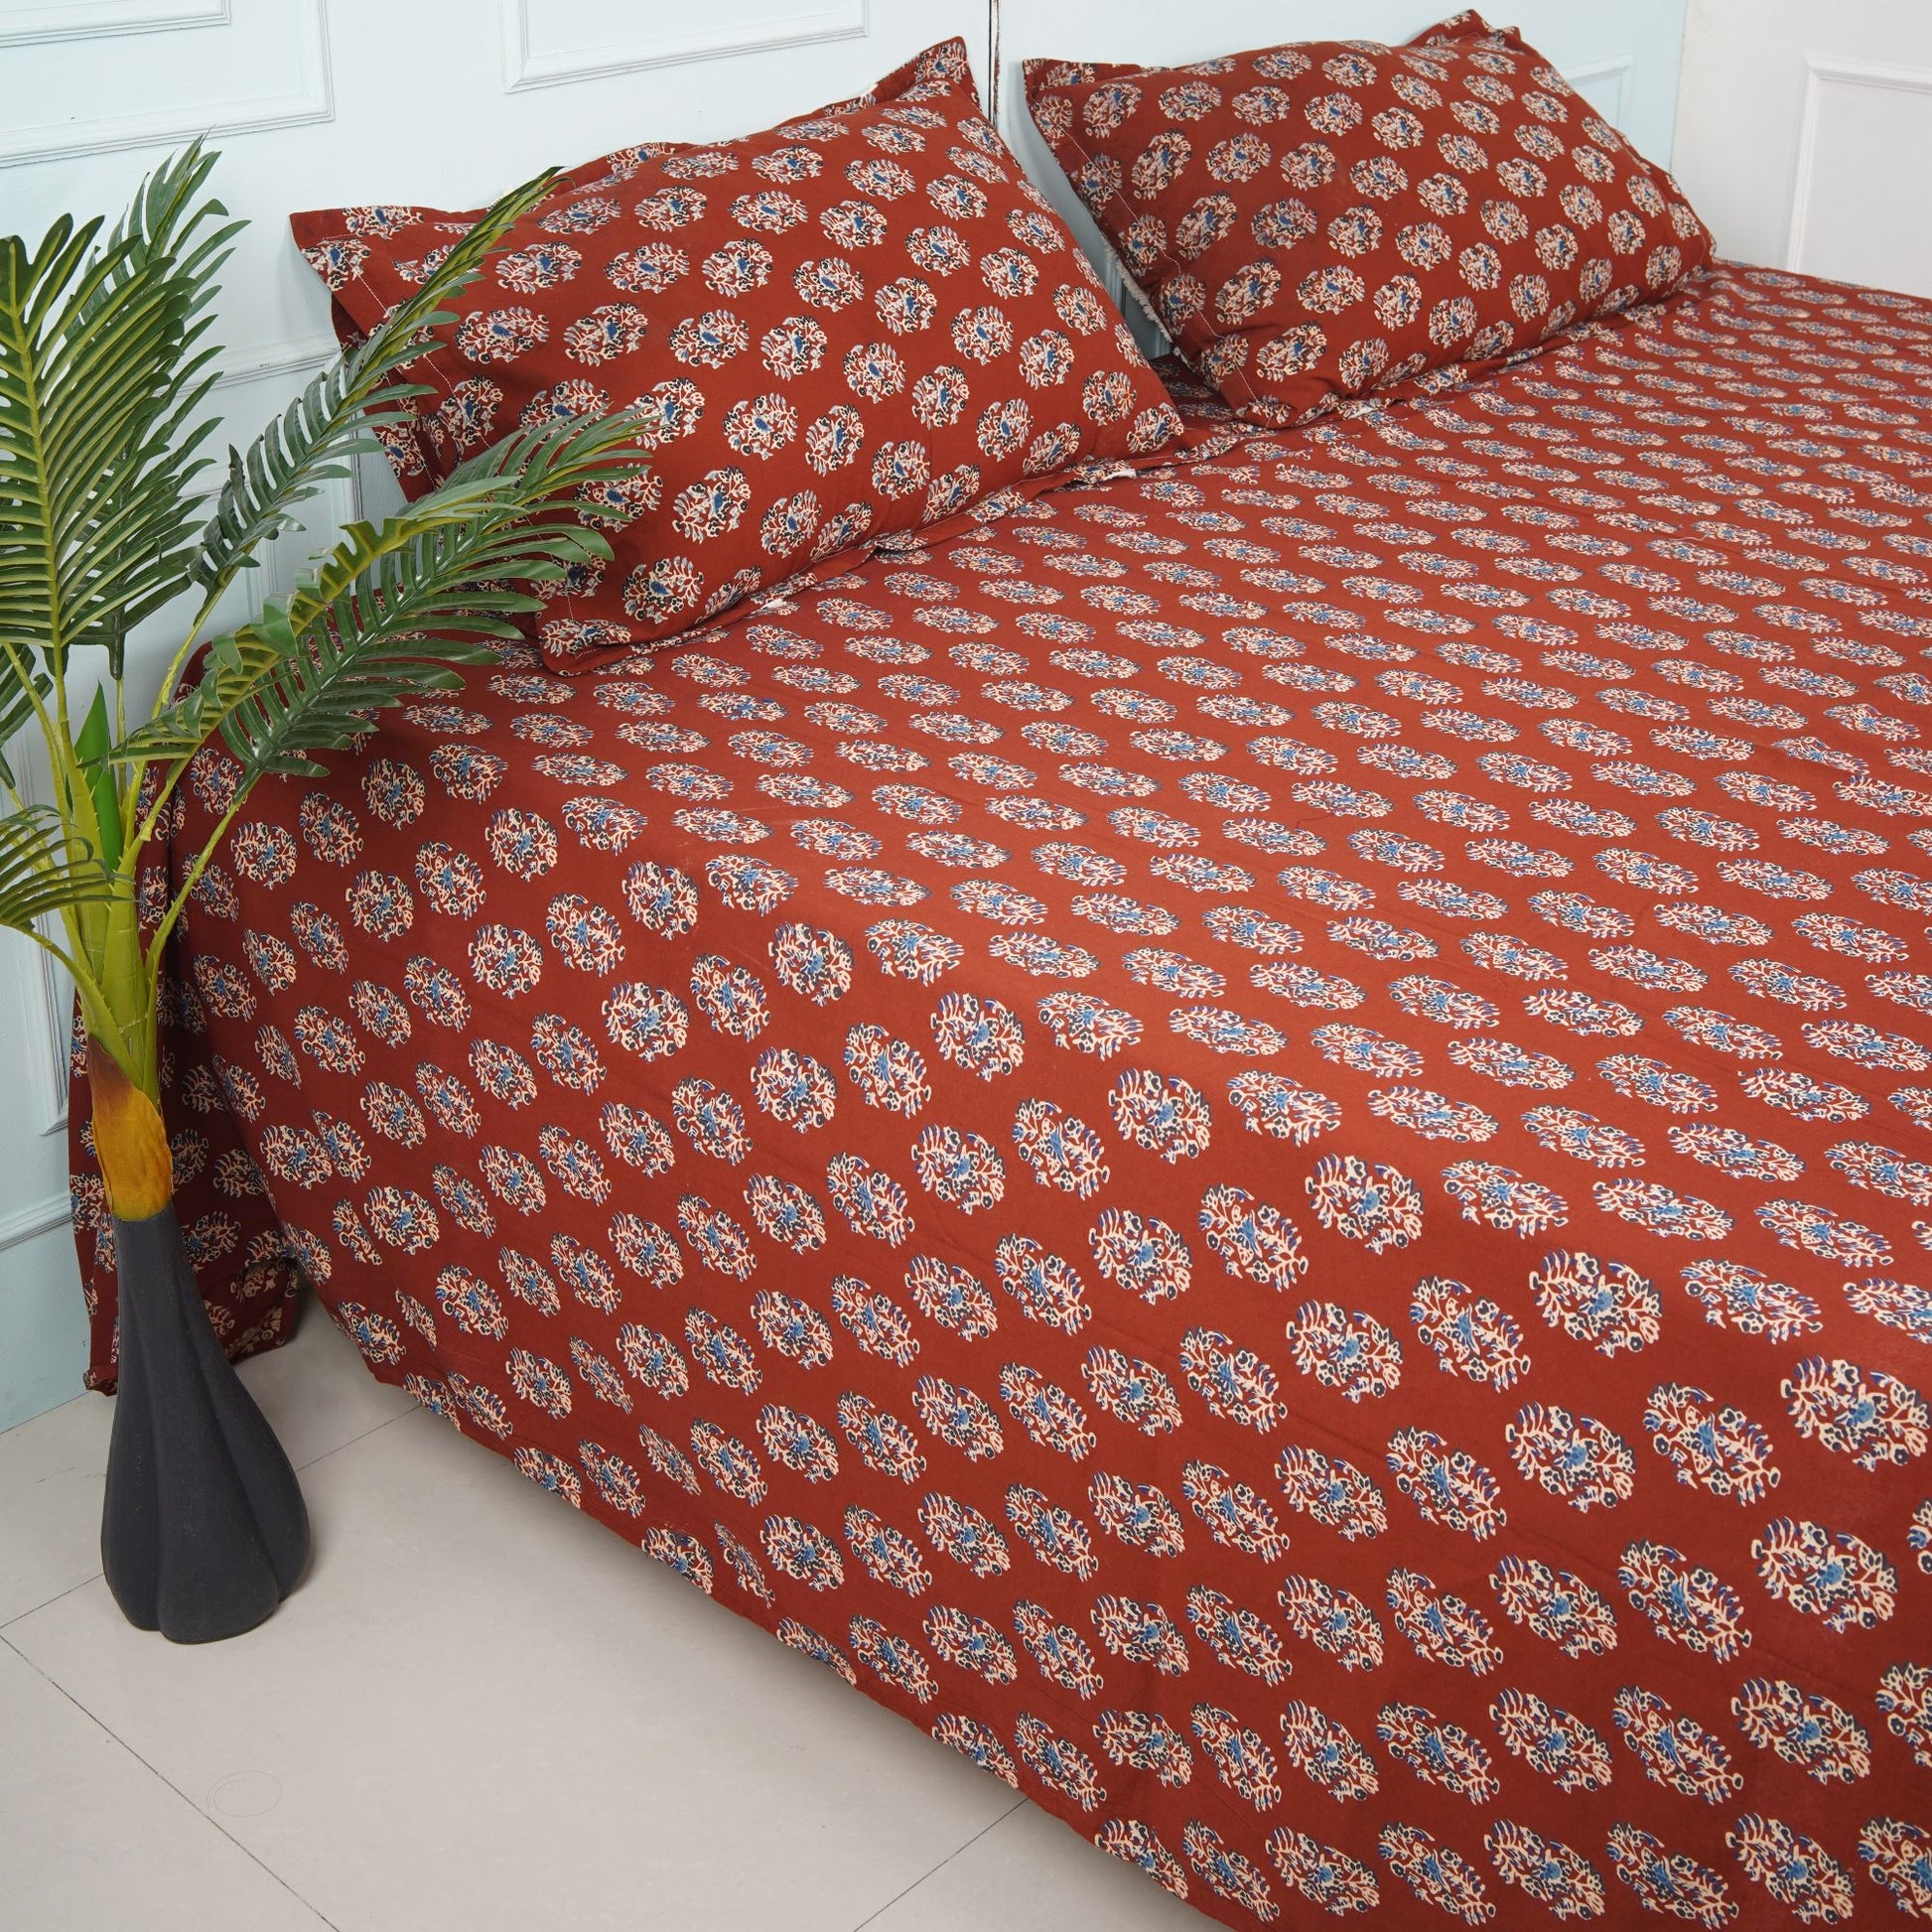 Block Print King Size Bedsheet- Red - The Teal Thread